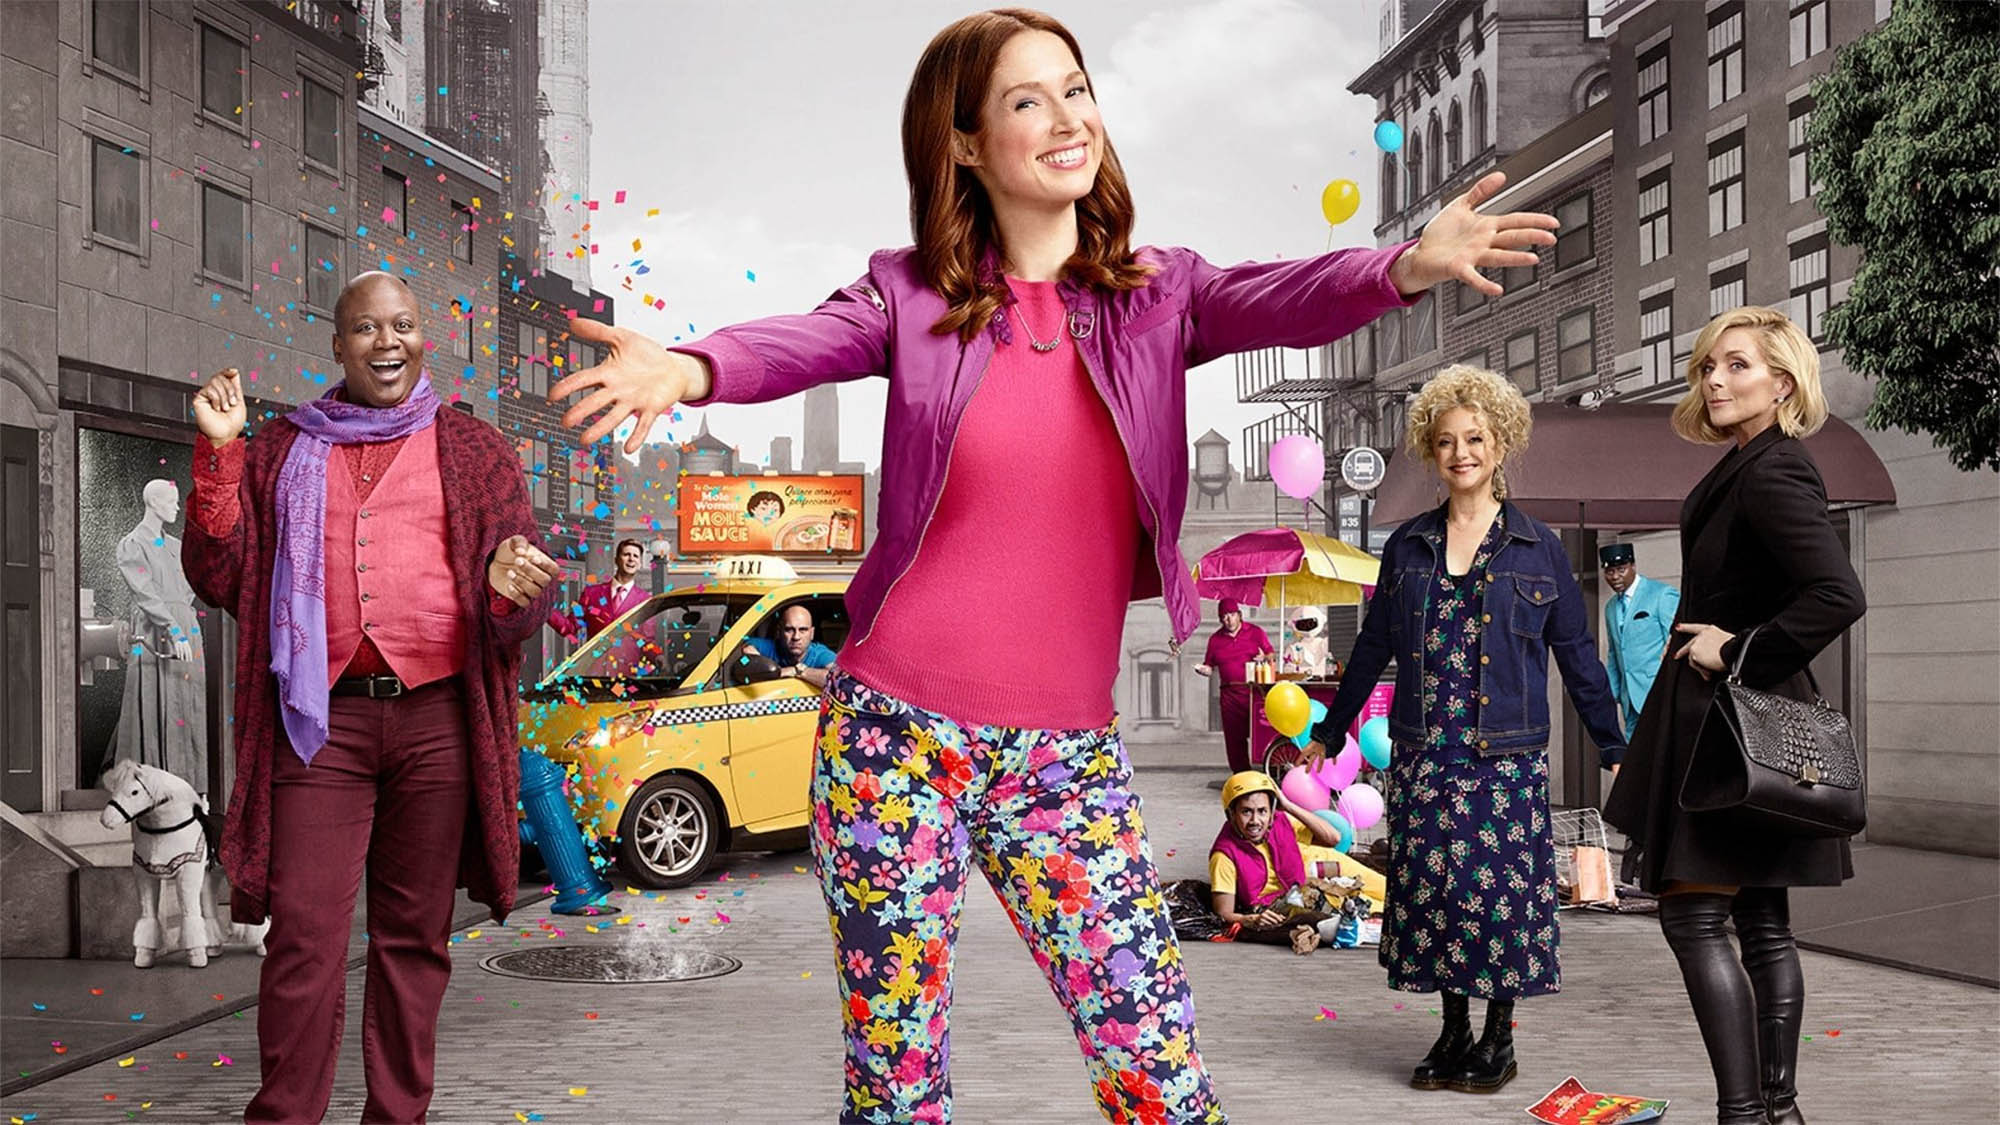 We’re ready to celebrate the greatness that was 'Unbreakable Kimmy Schmidt'. Here’s our ode to the strong-as-hell women who changed our lives forever.